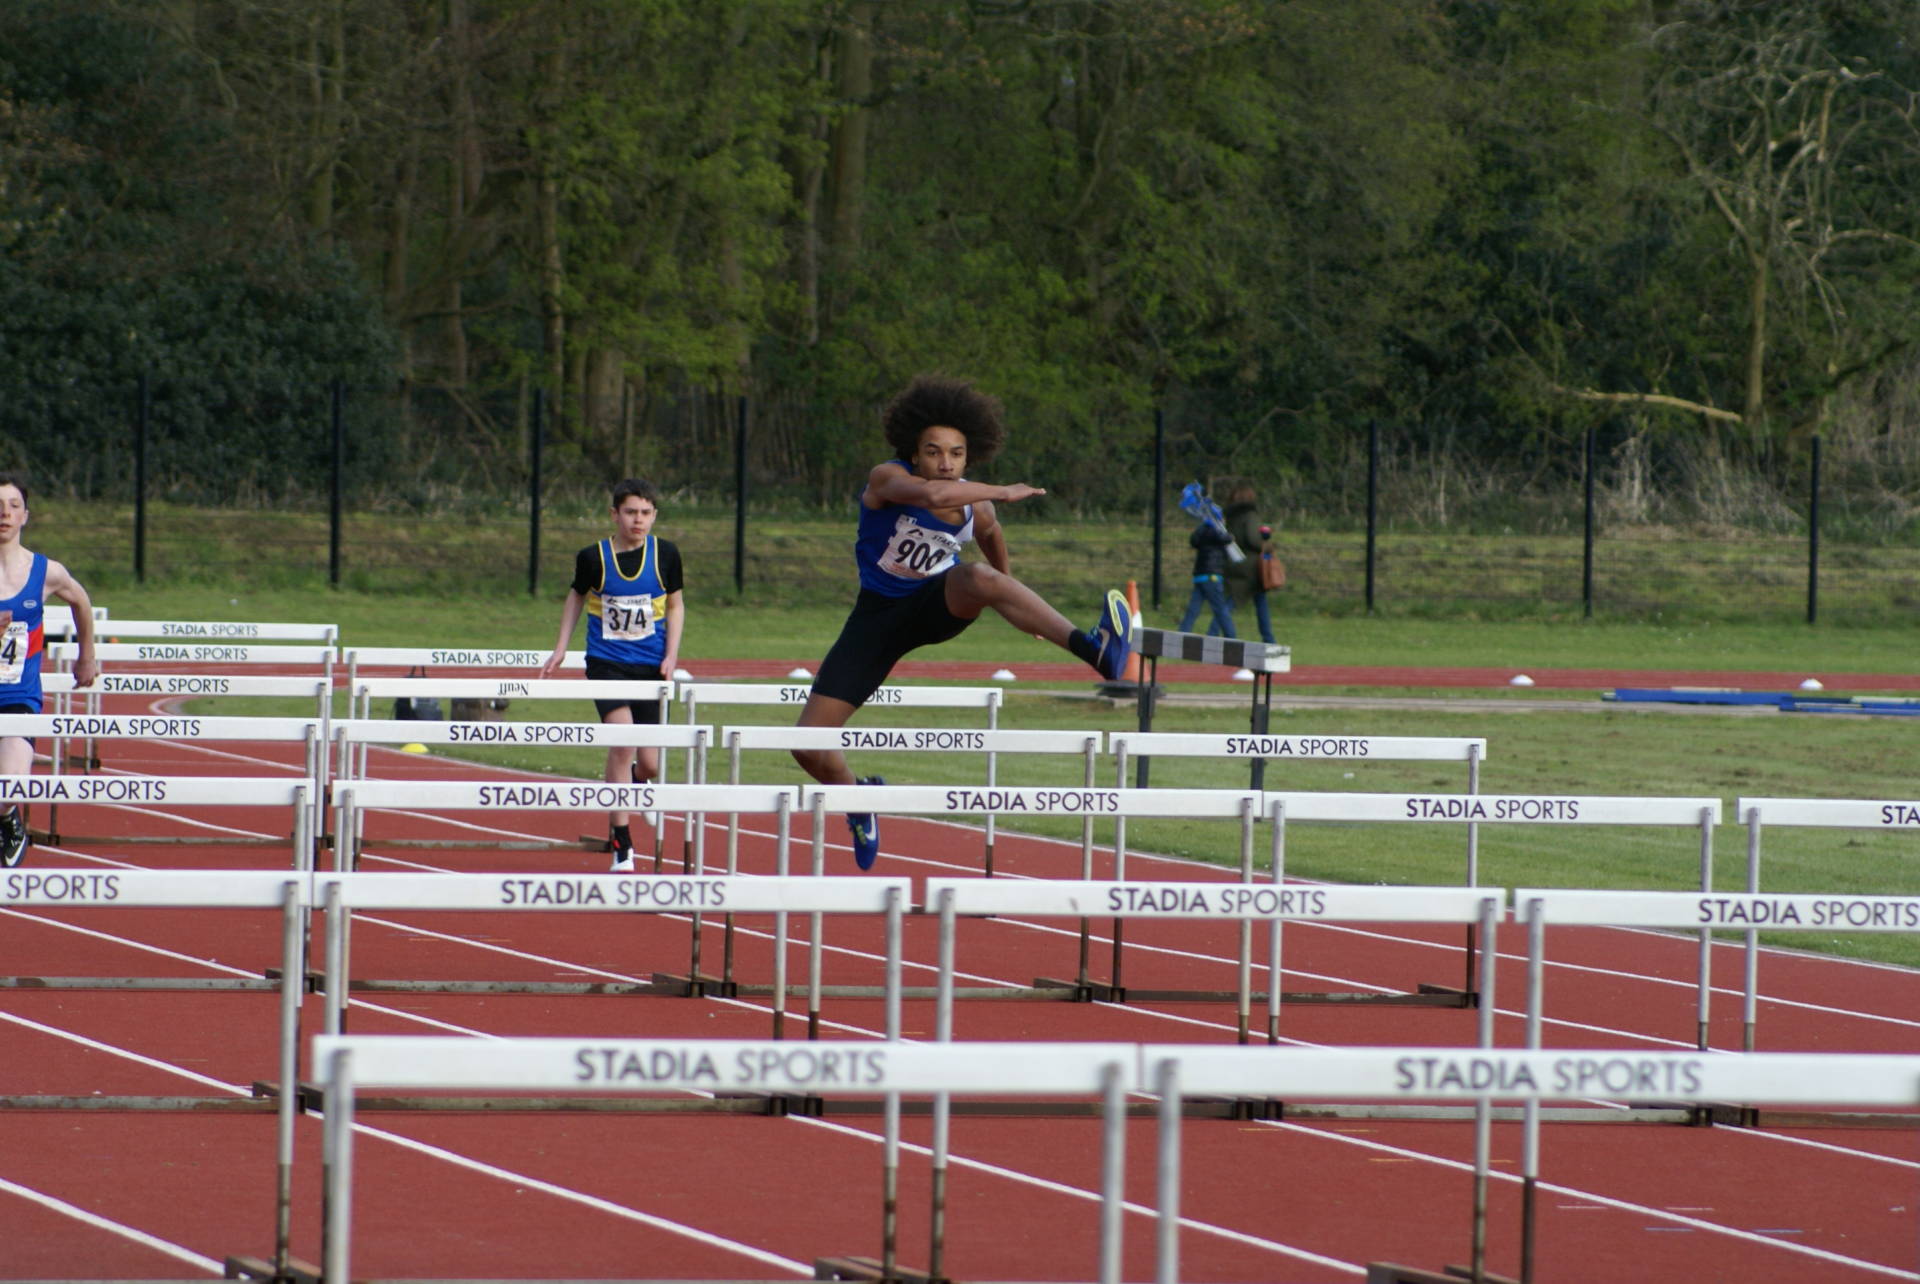 Loads of new PB’s for Harriers at first fixture of the Mid Lancs Track & Field season